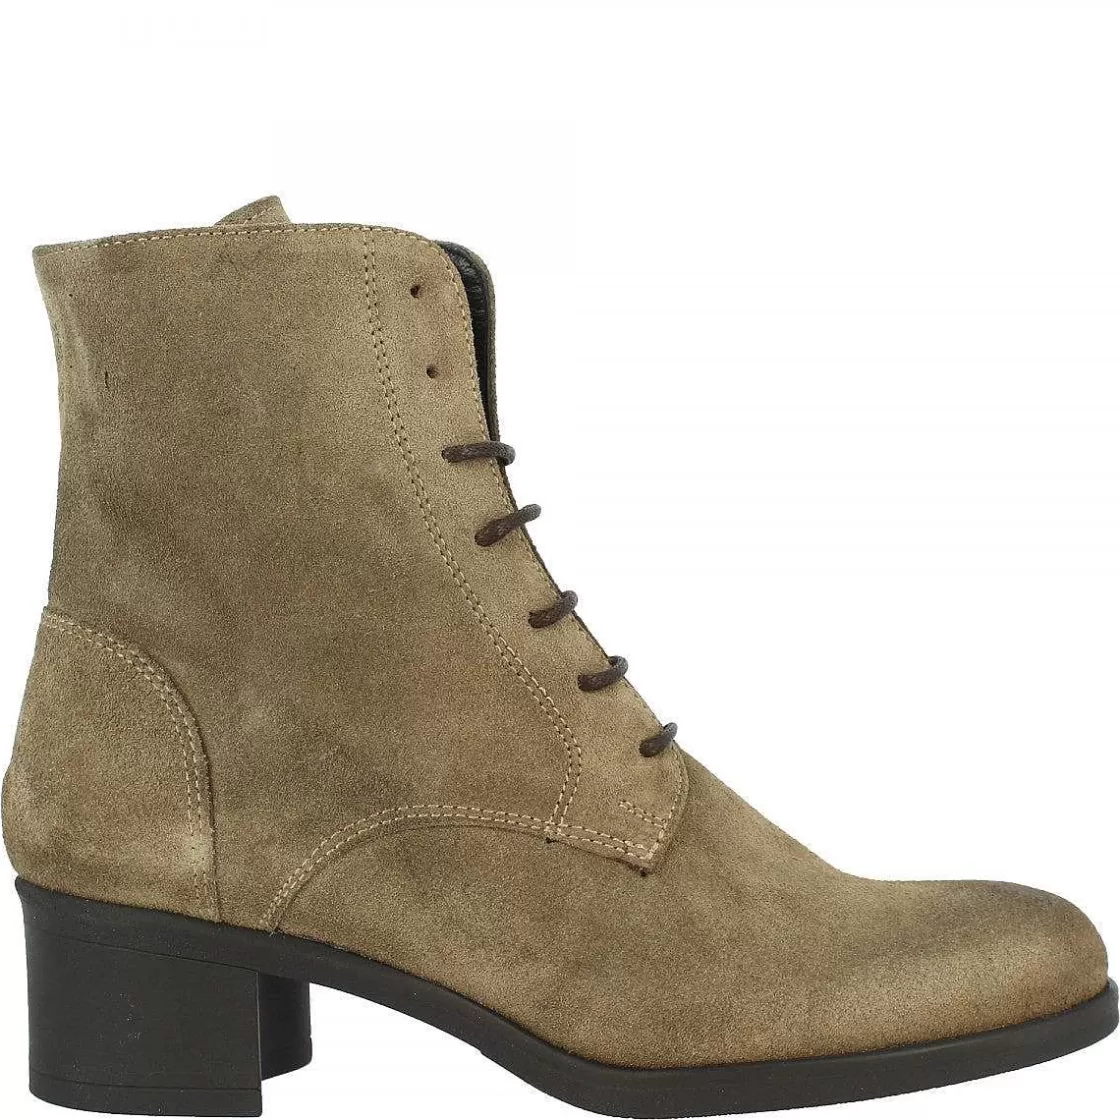 Leonardo Women'S Handmade Lace-Up Ankle Boots In Mud Suede Leather With Zip New